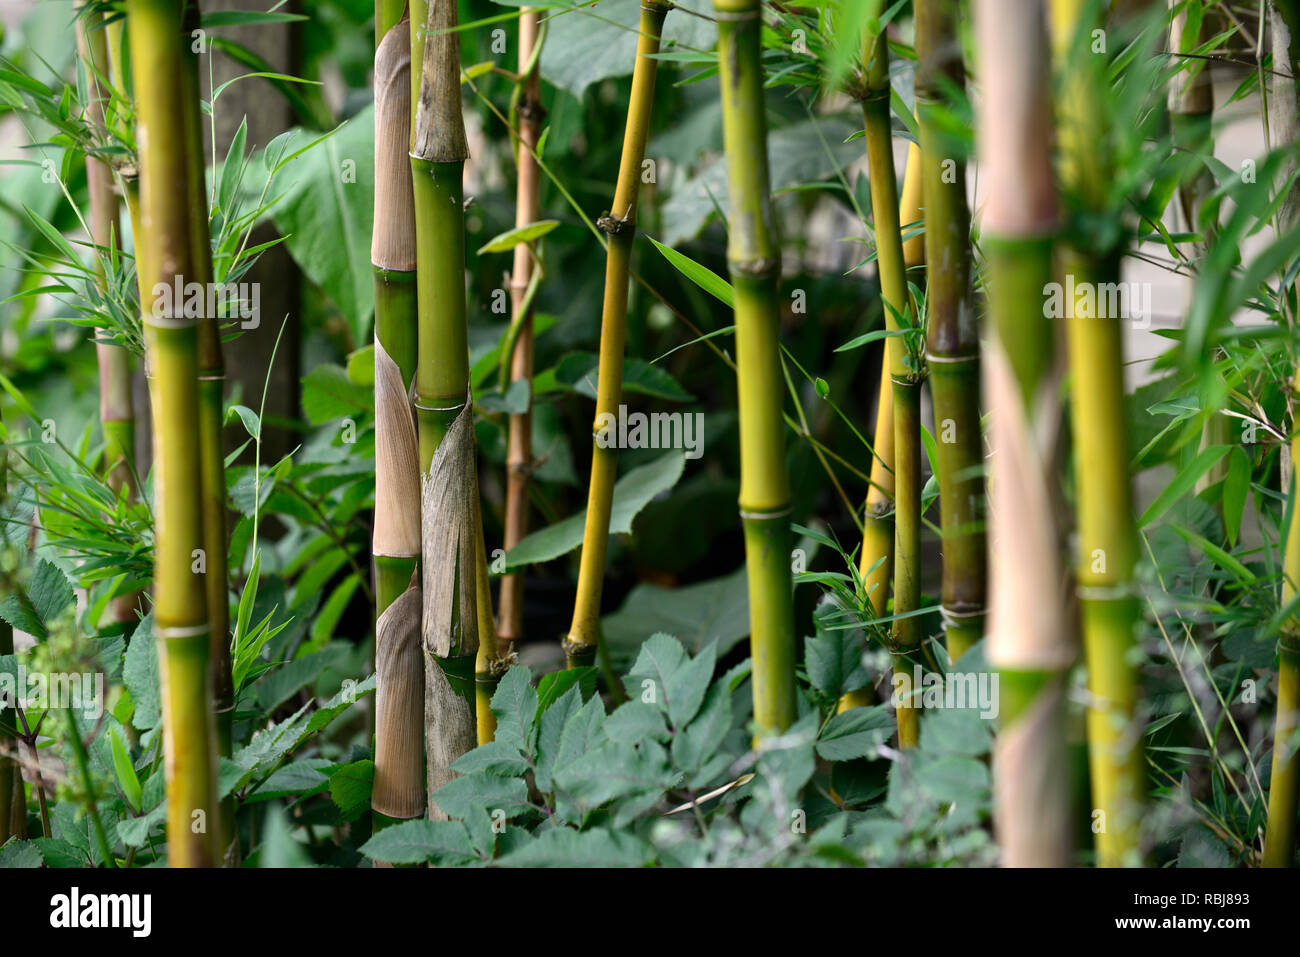 Chusquea montana,bamboo,olive green canes,cane,culm,culms,bamboos,clumper,clump forming,RM Floral Stock Photo